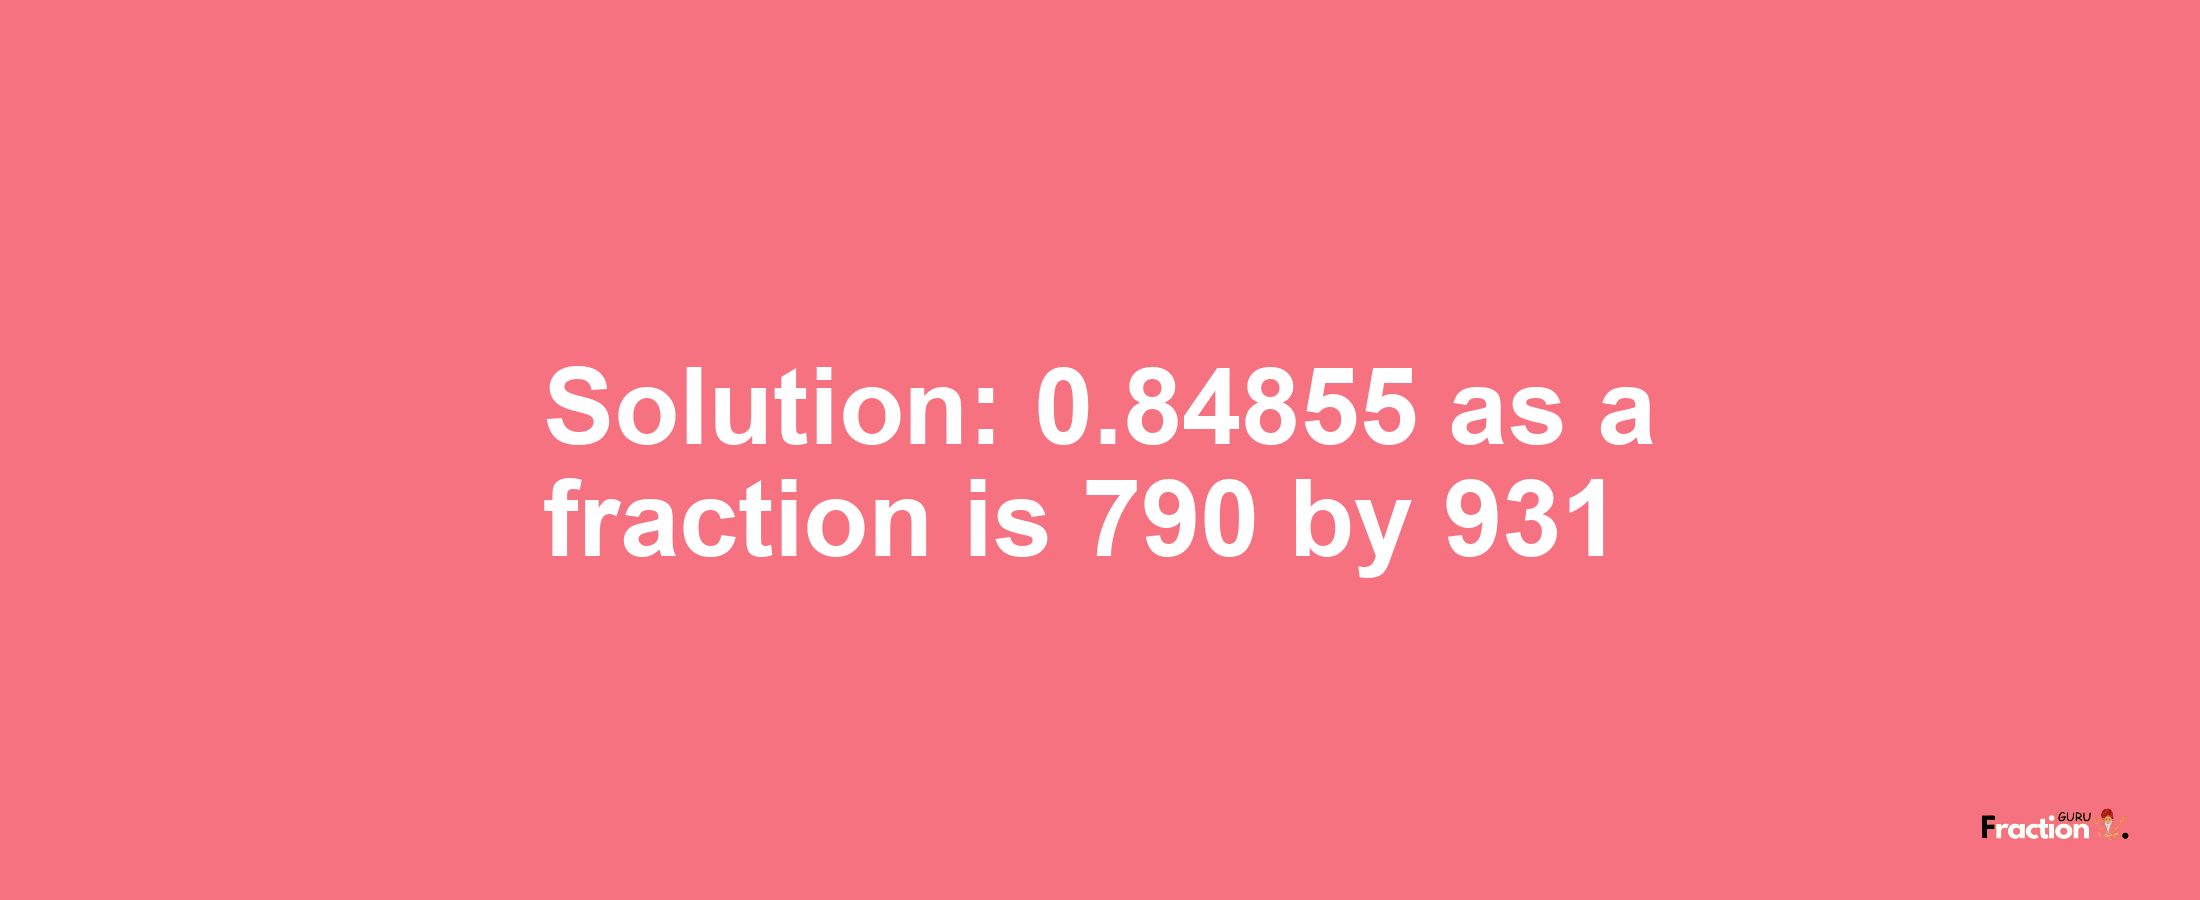 Solution:0.84855 as a fraction is 790/931